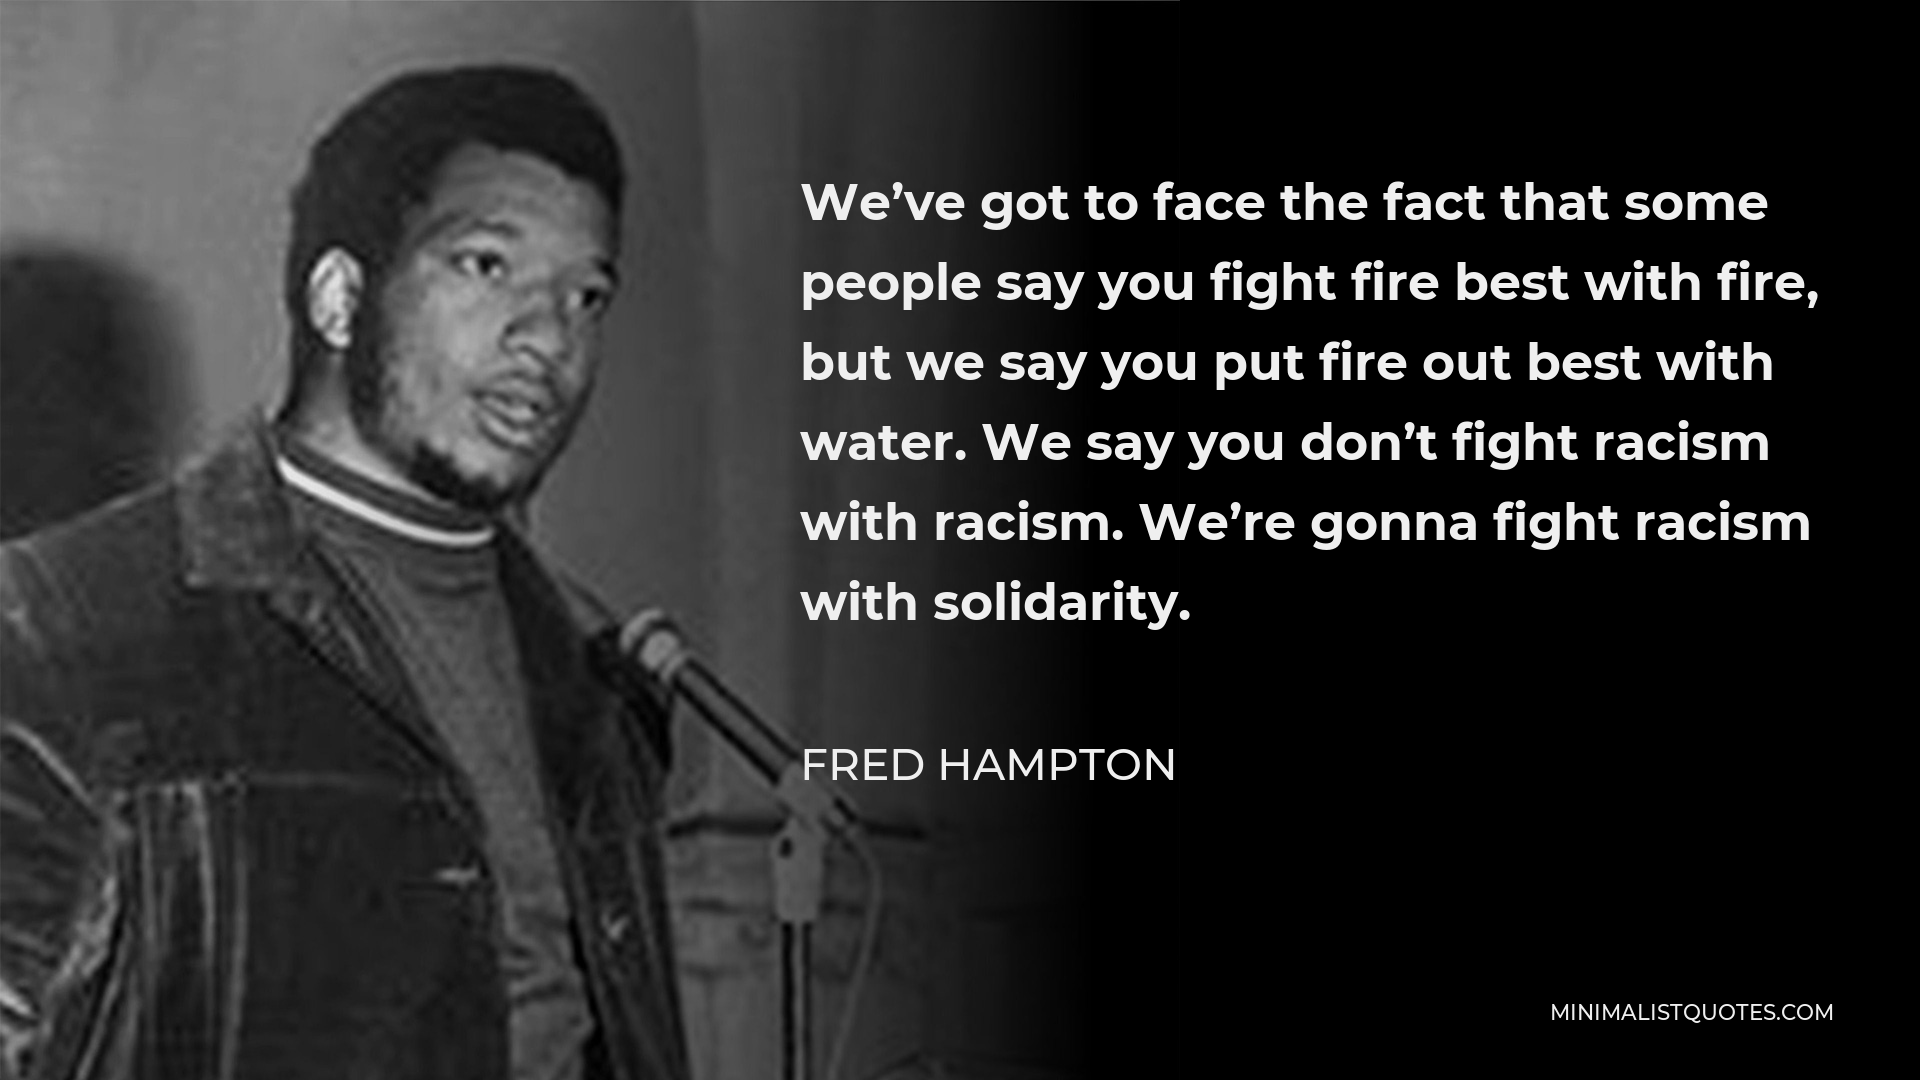 Fred Hampton Quote - We’ve got to face the fact that some people say you fight fire best with fire, but we say you put fire out best with water. We say you don’t fight racism with racism. We’re gonna fight racism with solidarity.